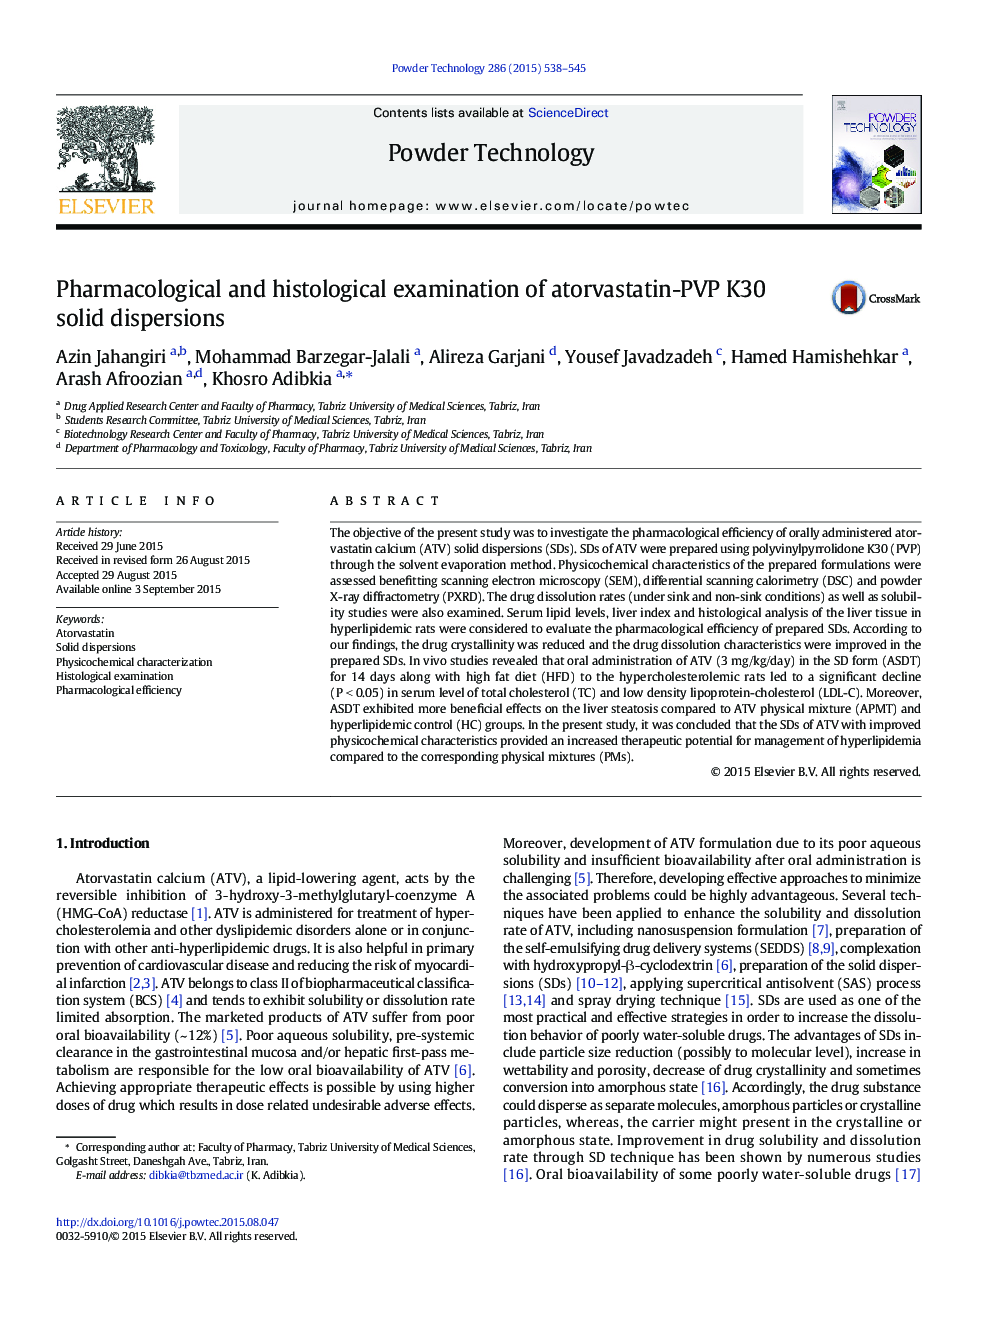 Pharmacological and histological examination of atorvastatin-PVP K30 solid dispersions